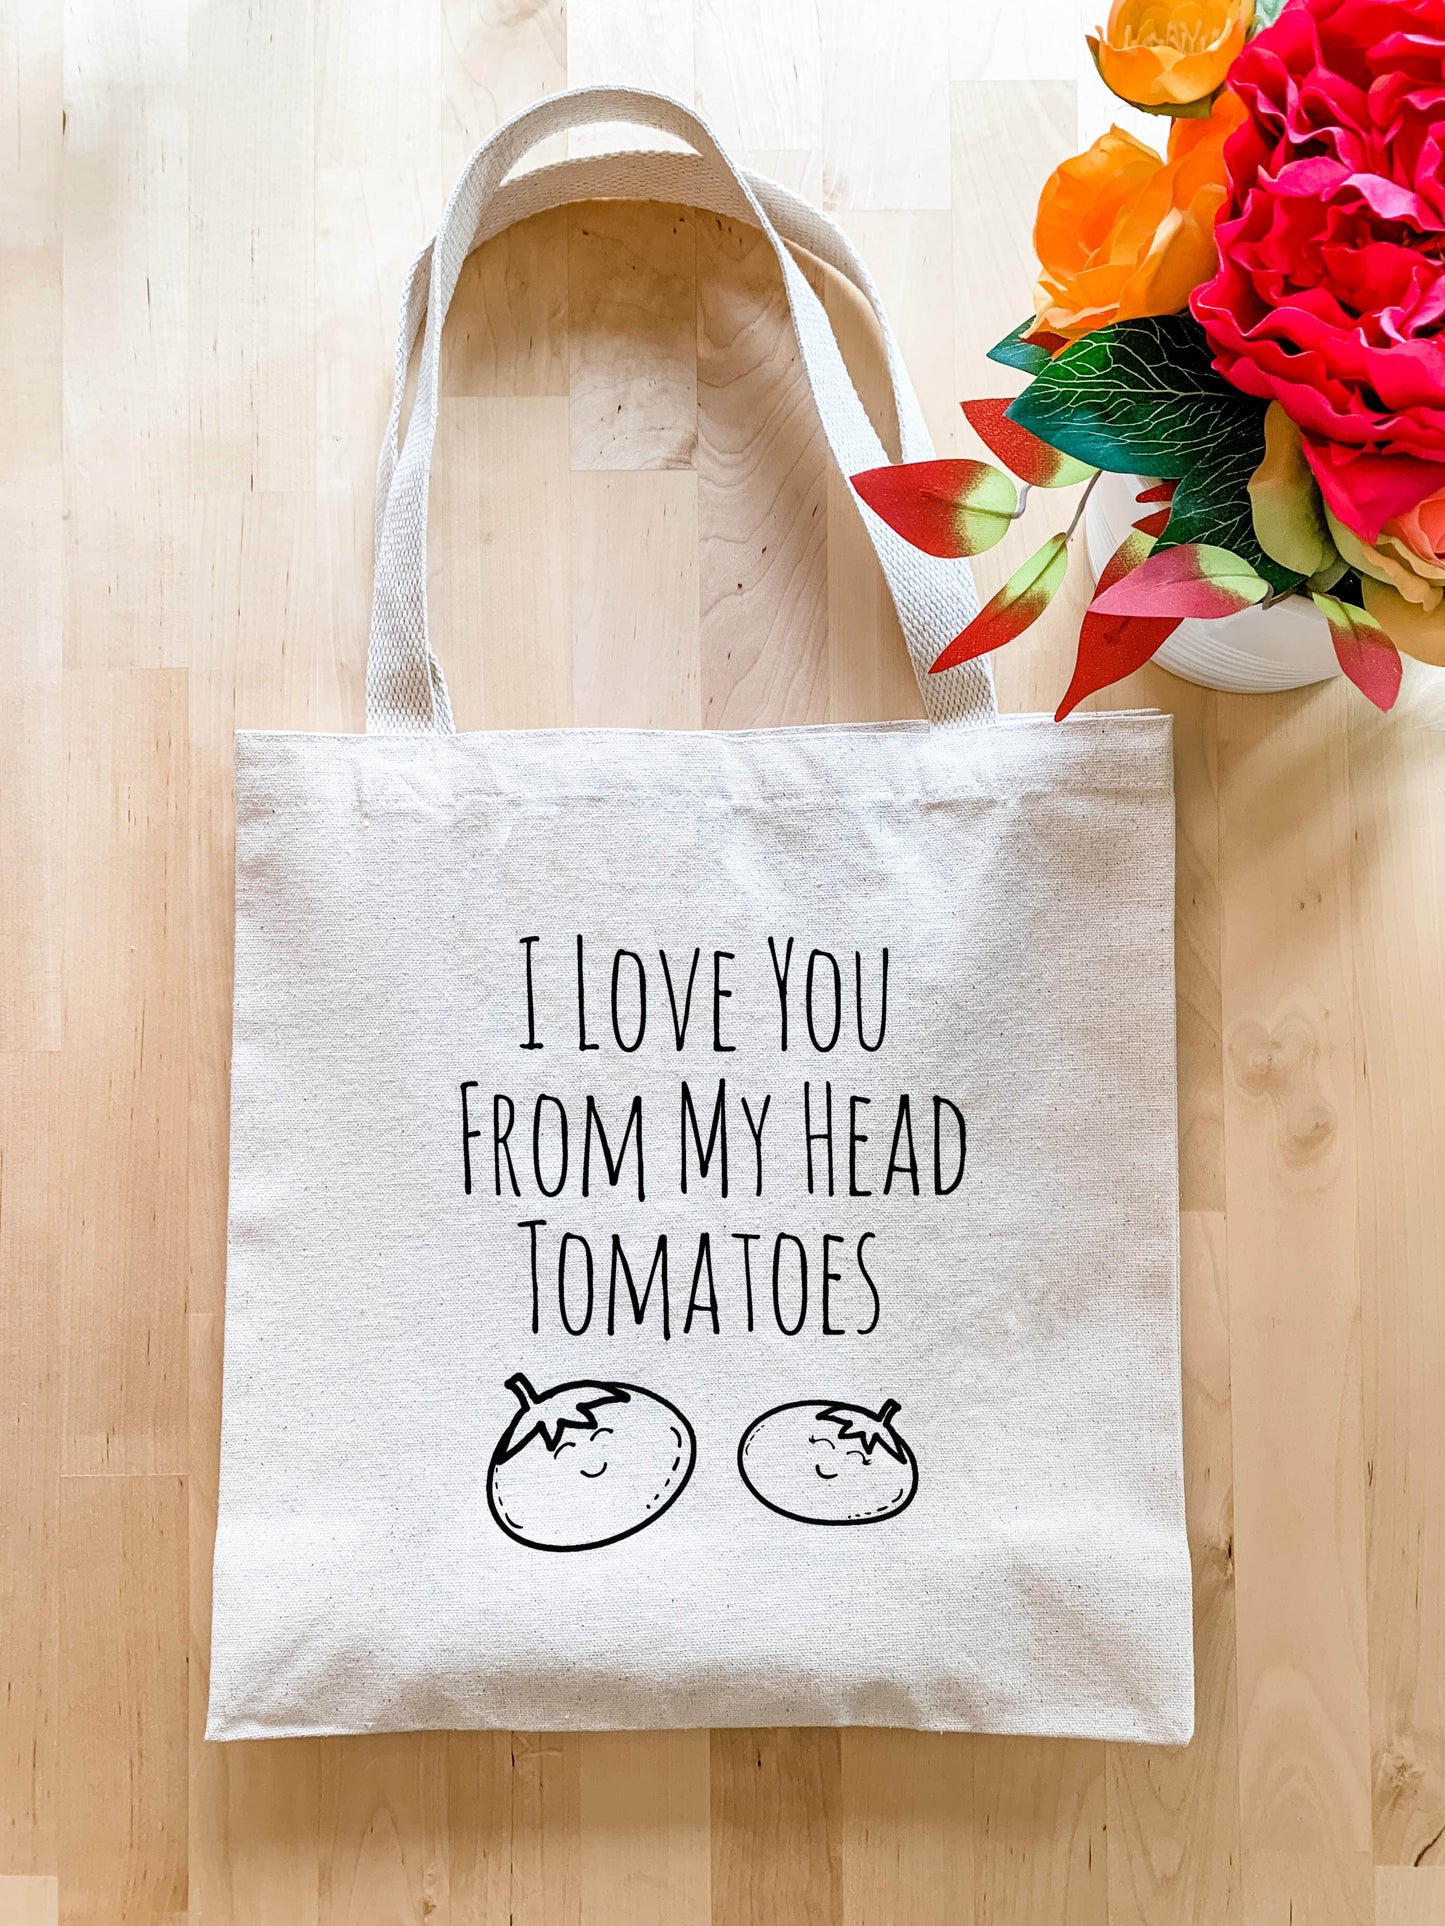 I Love You From My Head Tomatoes - Tote Bag - MoonlightMakers